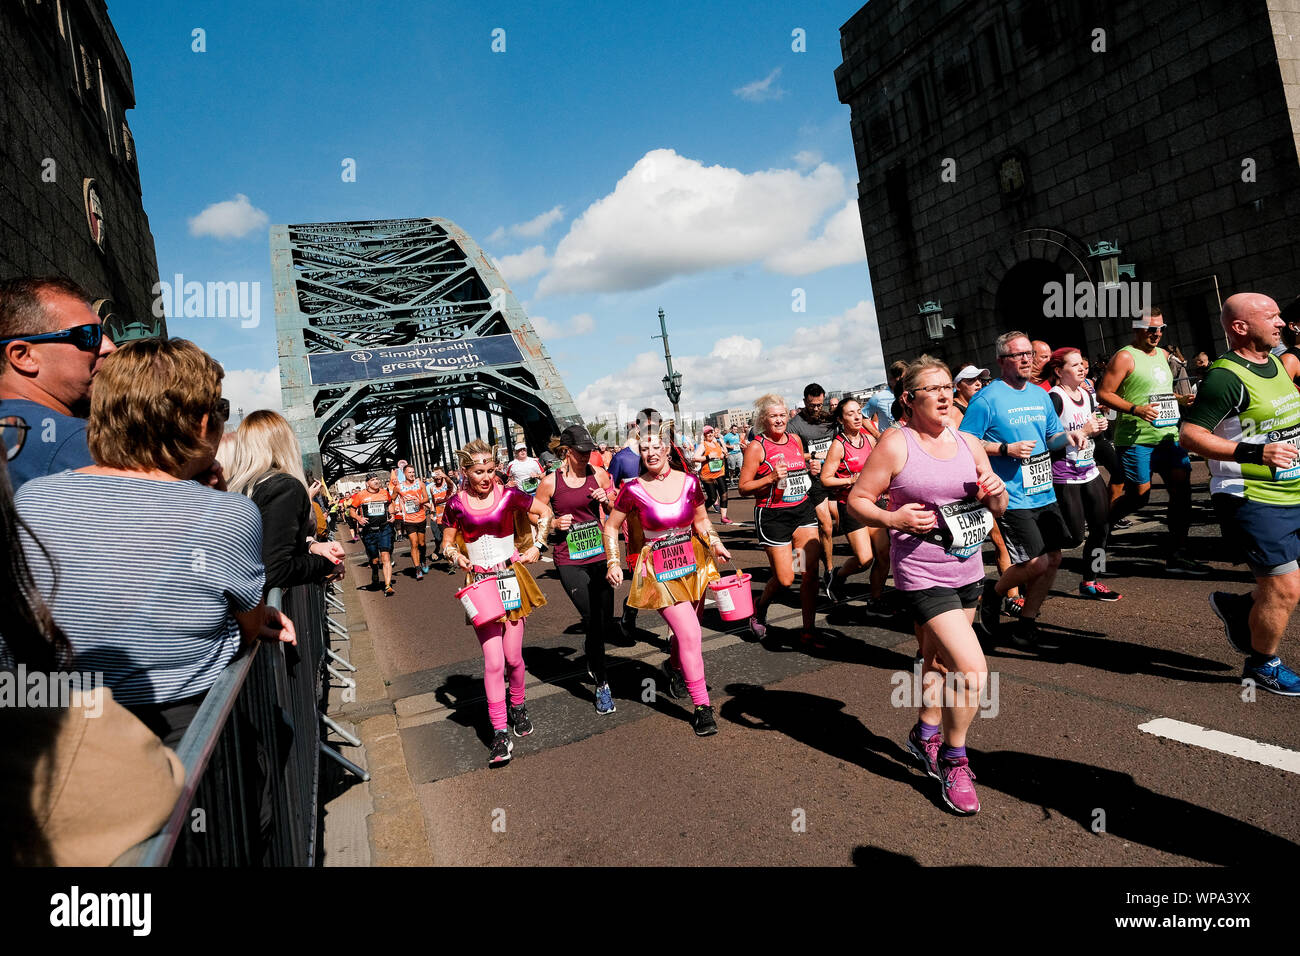 Runners compete in the 2019 Simplyhealth Great North Run in Newcastle Upon Tyne, England. Stock Photo